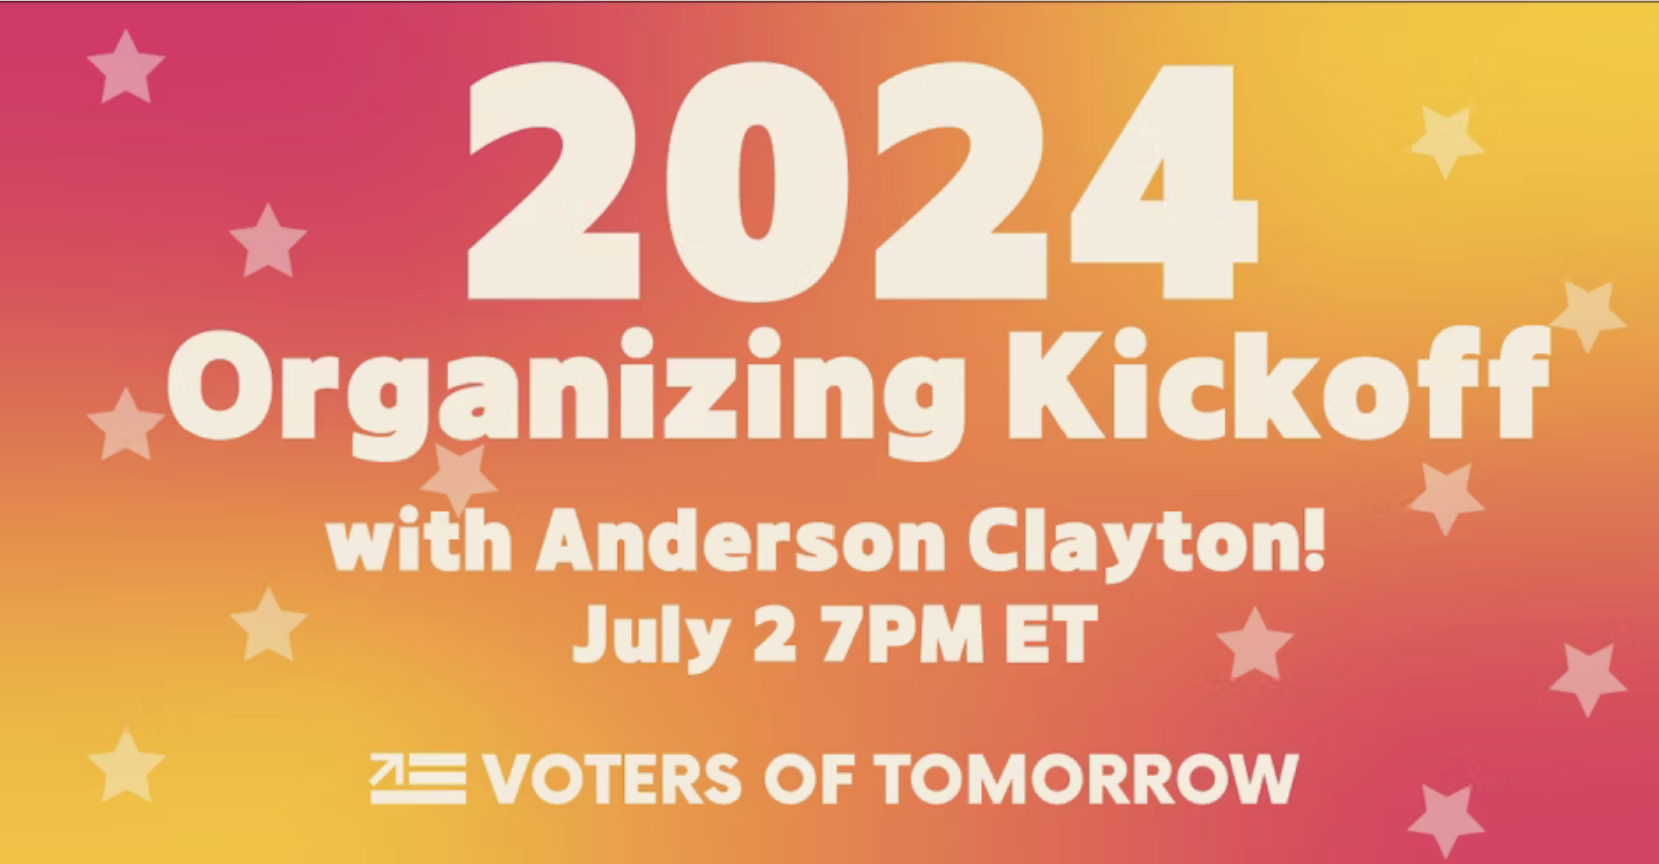 2024 Organizing Kickoff with Anderson Clayton